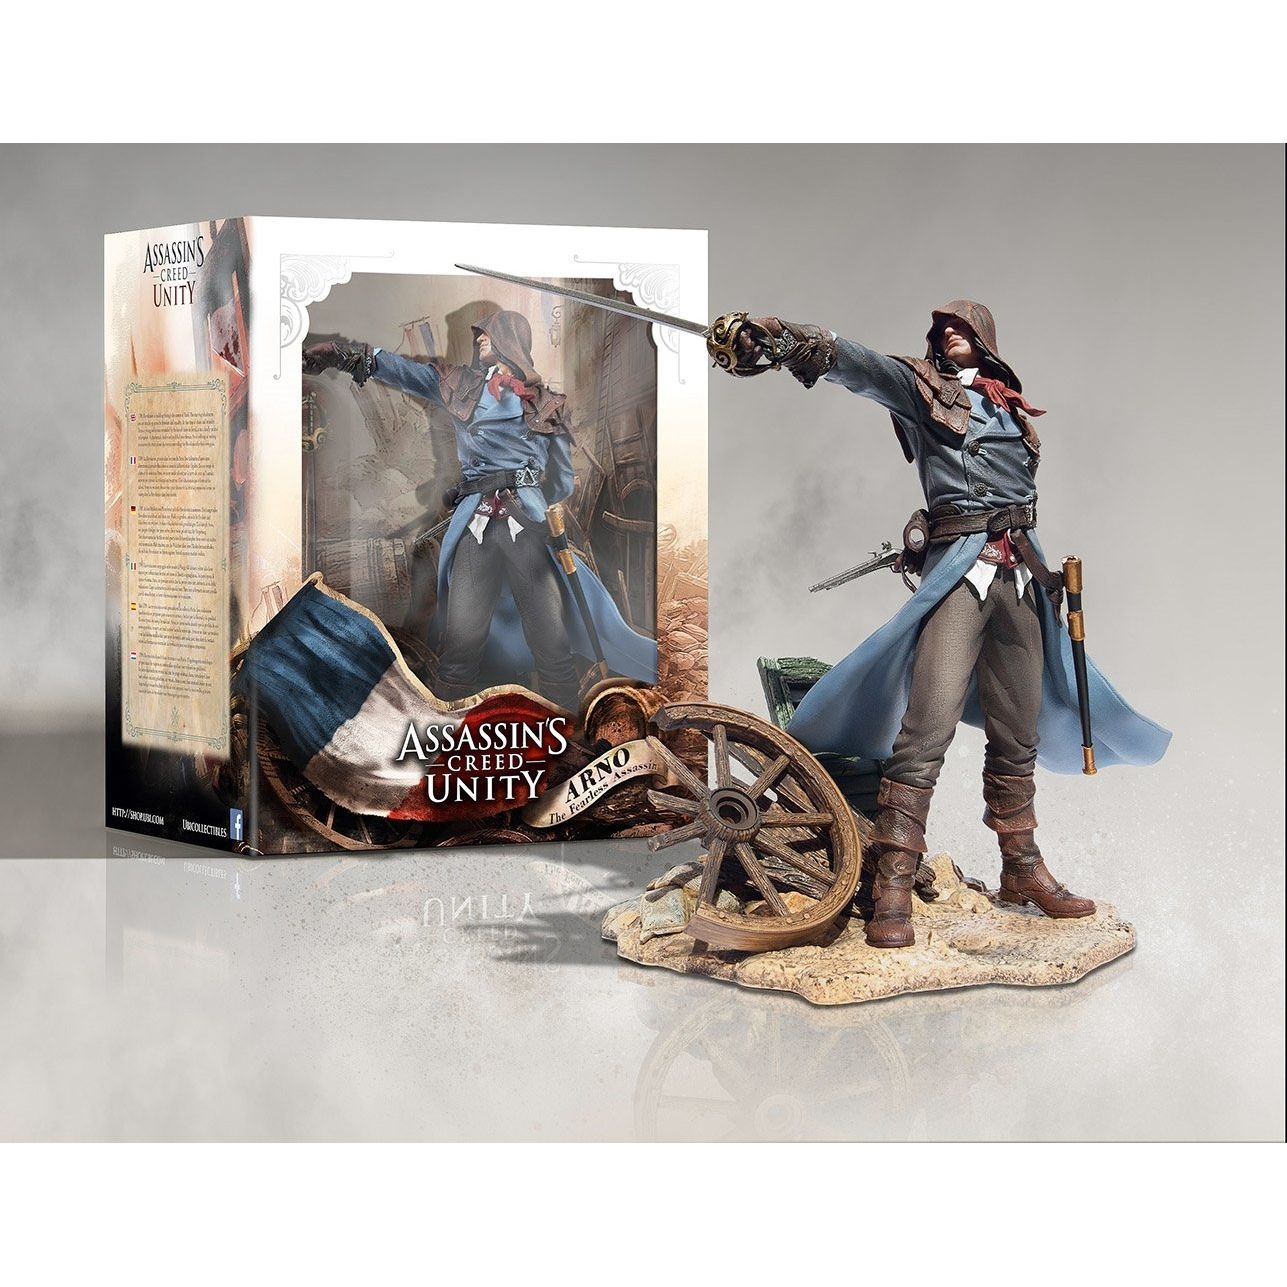 ASSASSIN'S CREED UNITY 'ARNO' COLLECTABLE FIGURE - jeux video game-x